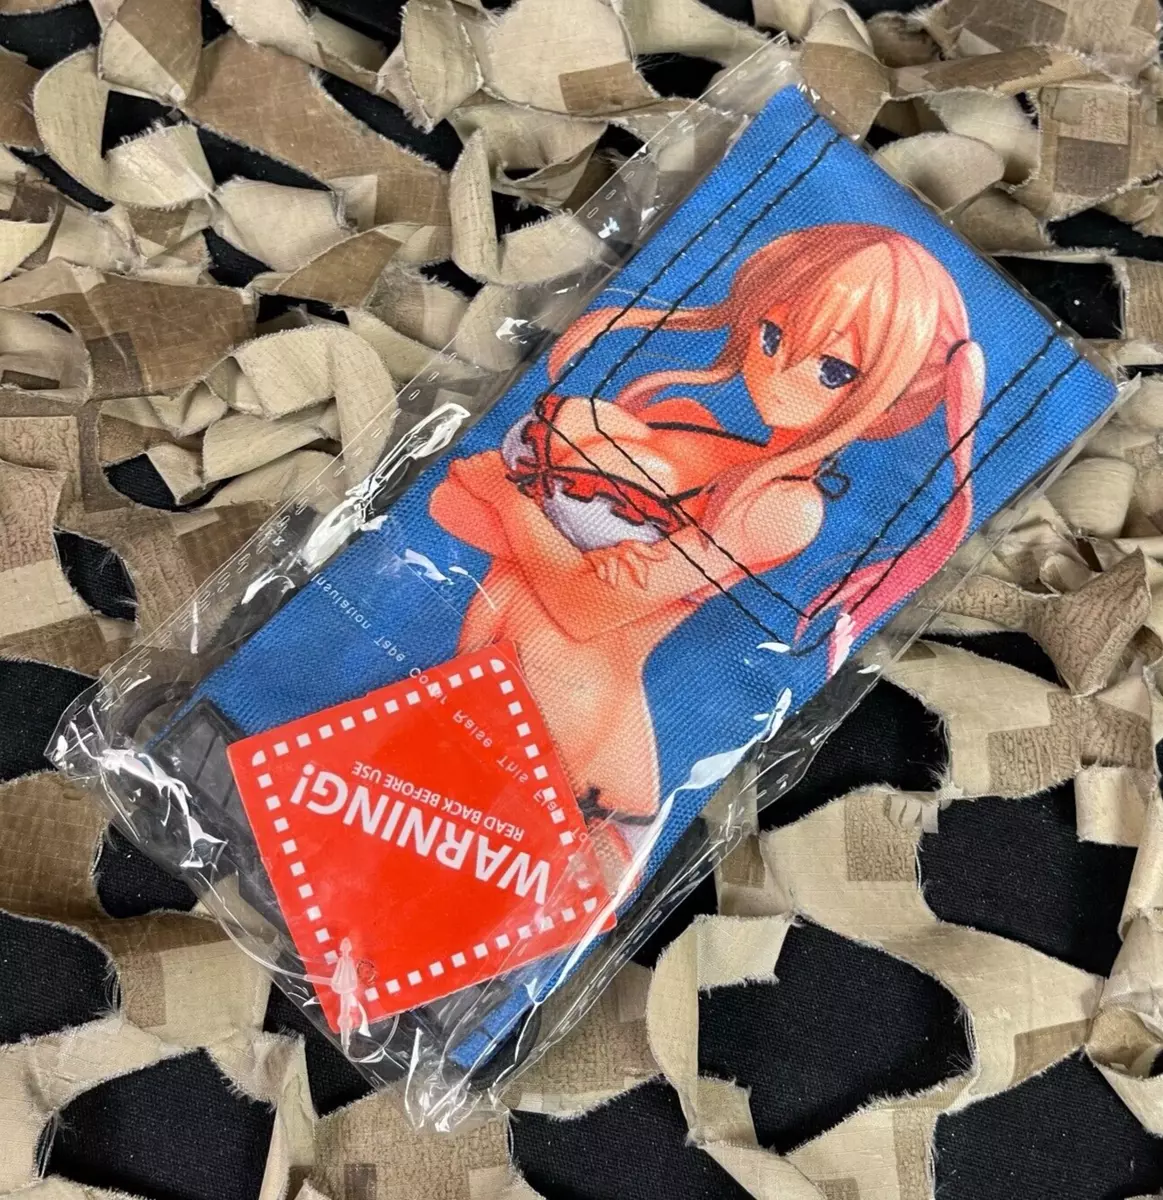 chris shigley recommends anime girl with condom pic